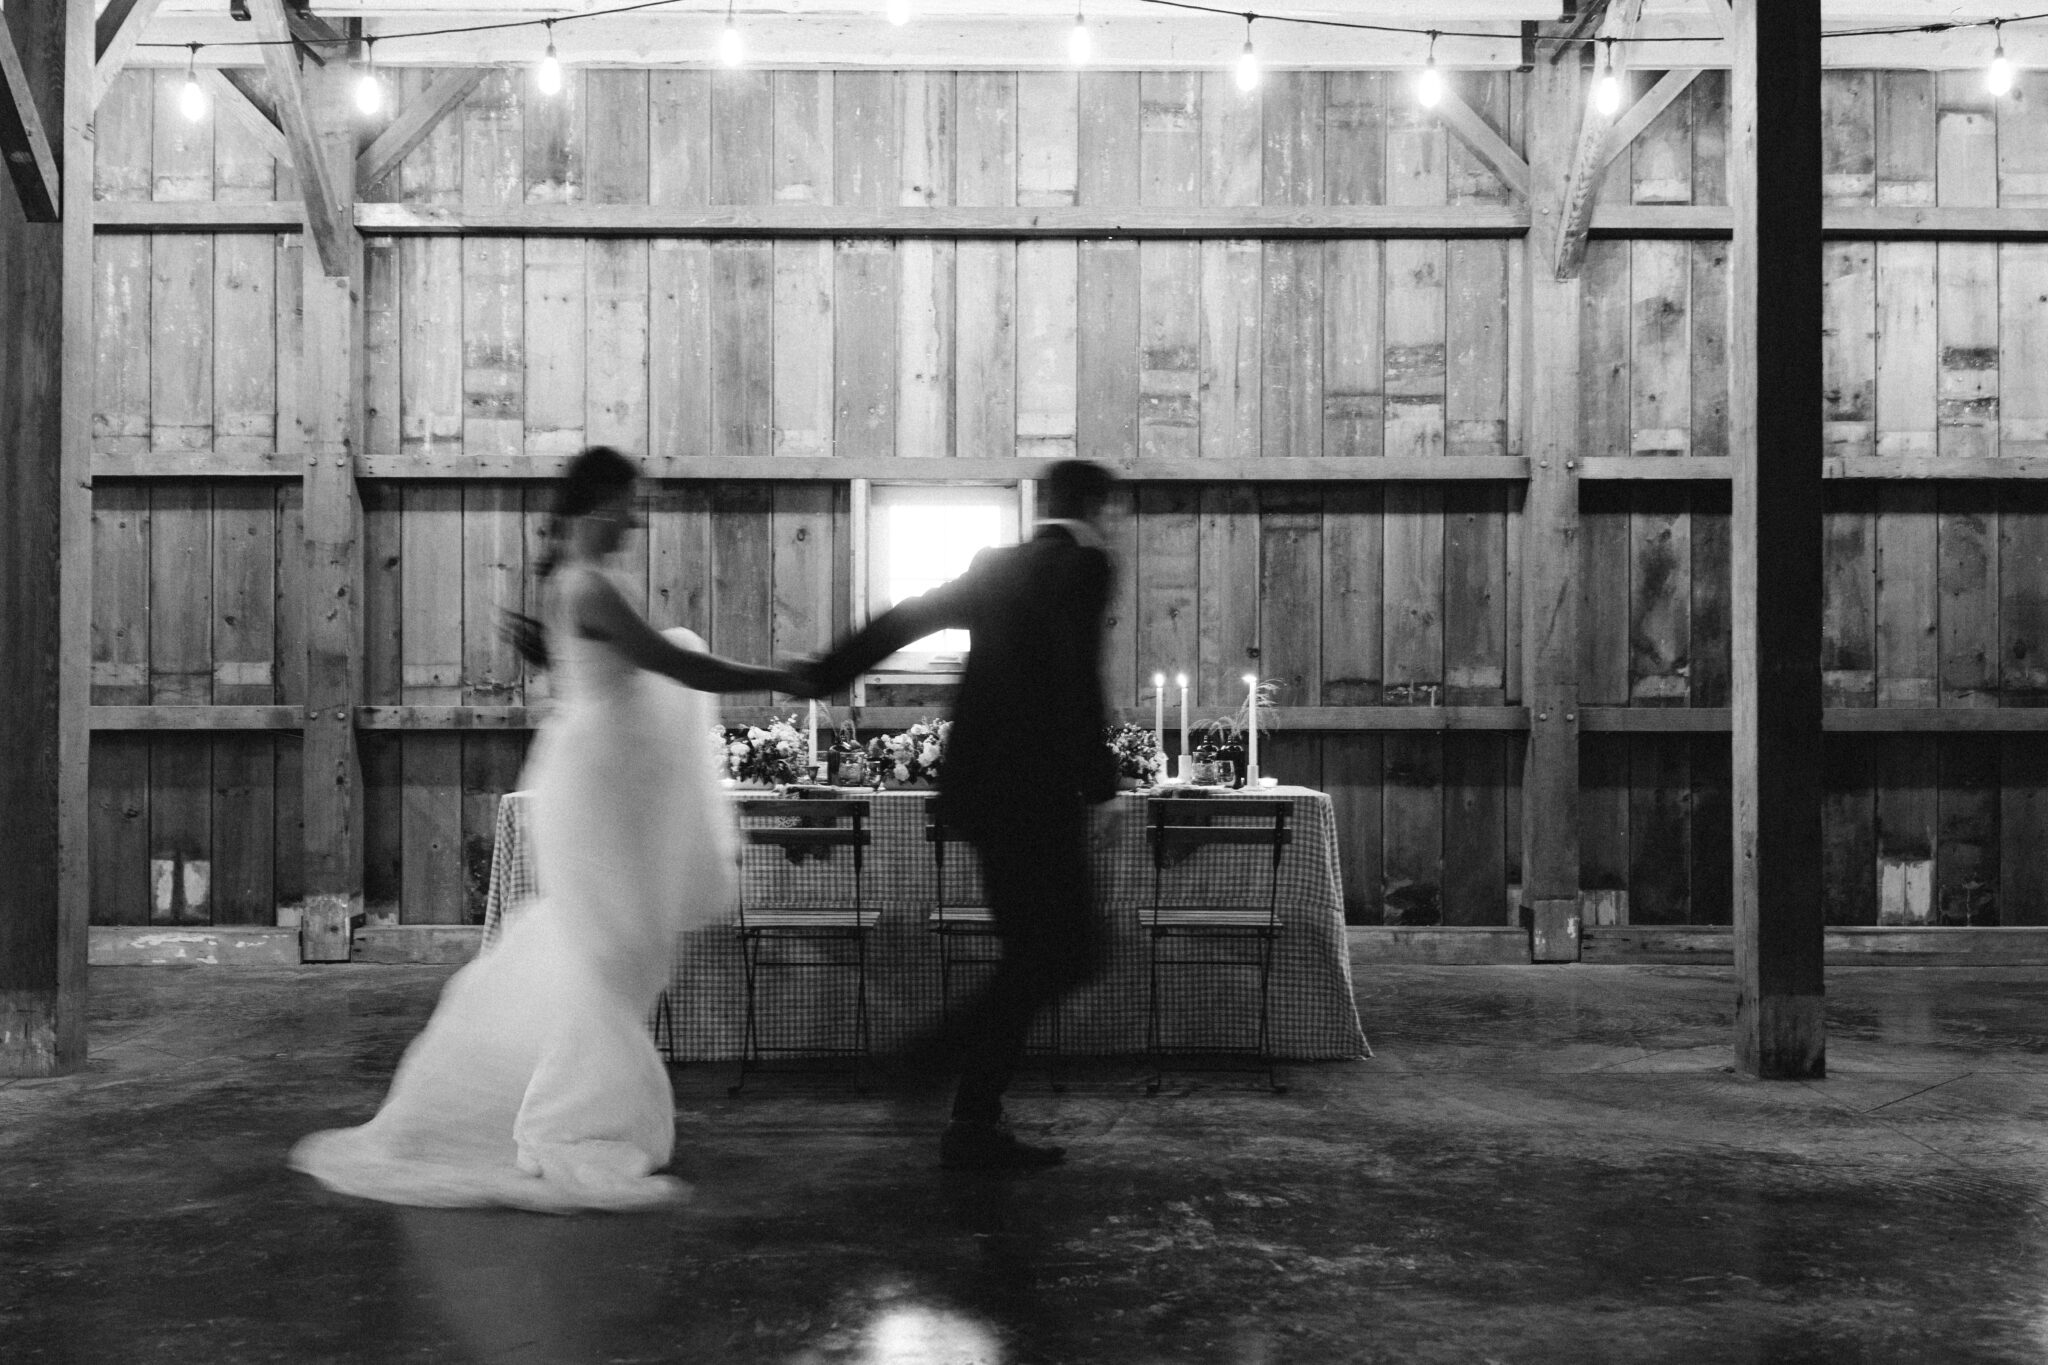 Wedding Inspiration With An Updated Take on Country Chic Wedding Style at Countryside Barn in Lethbridge Alberta, modern wedding photography style, couple running in front of wedding table, blurred photography style